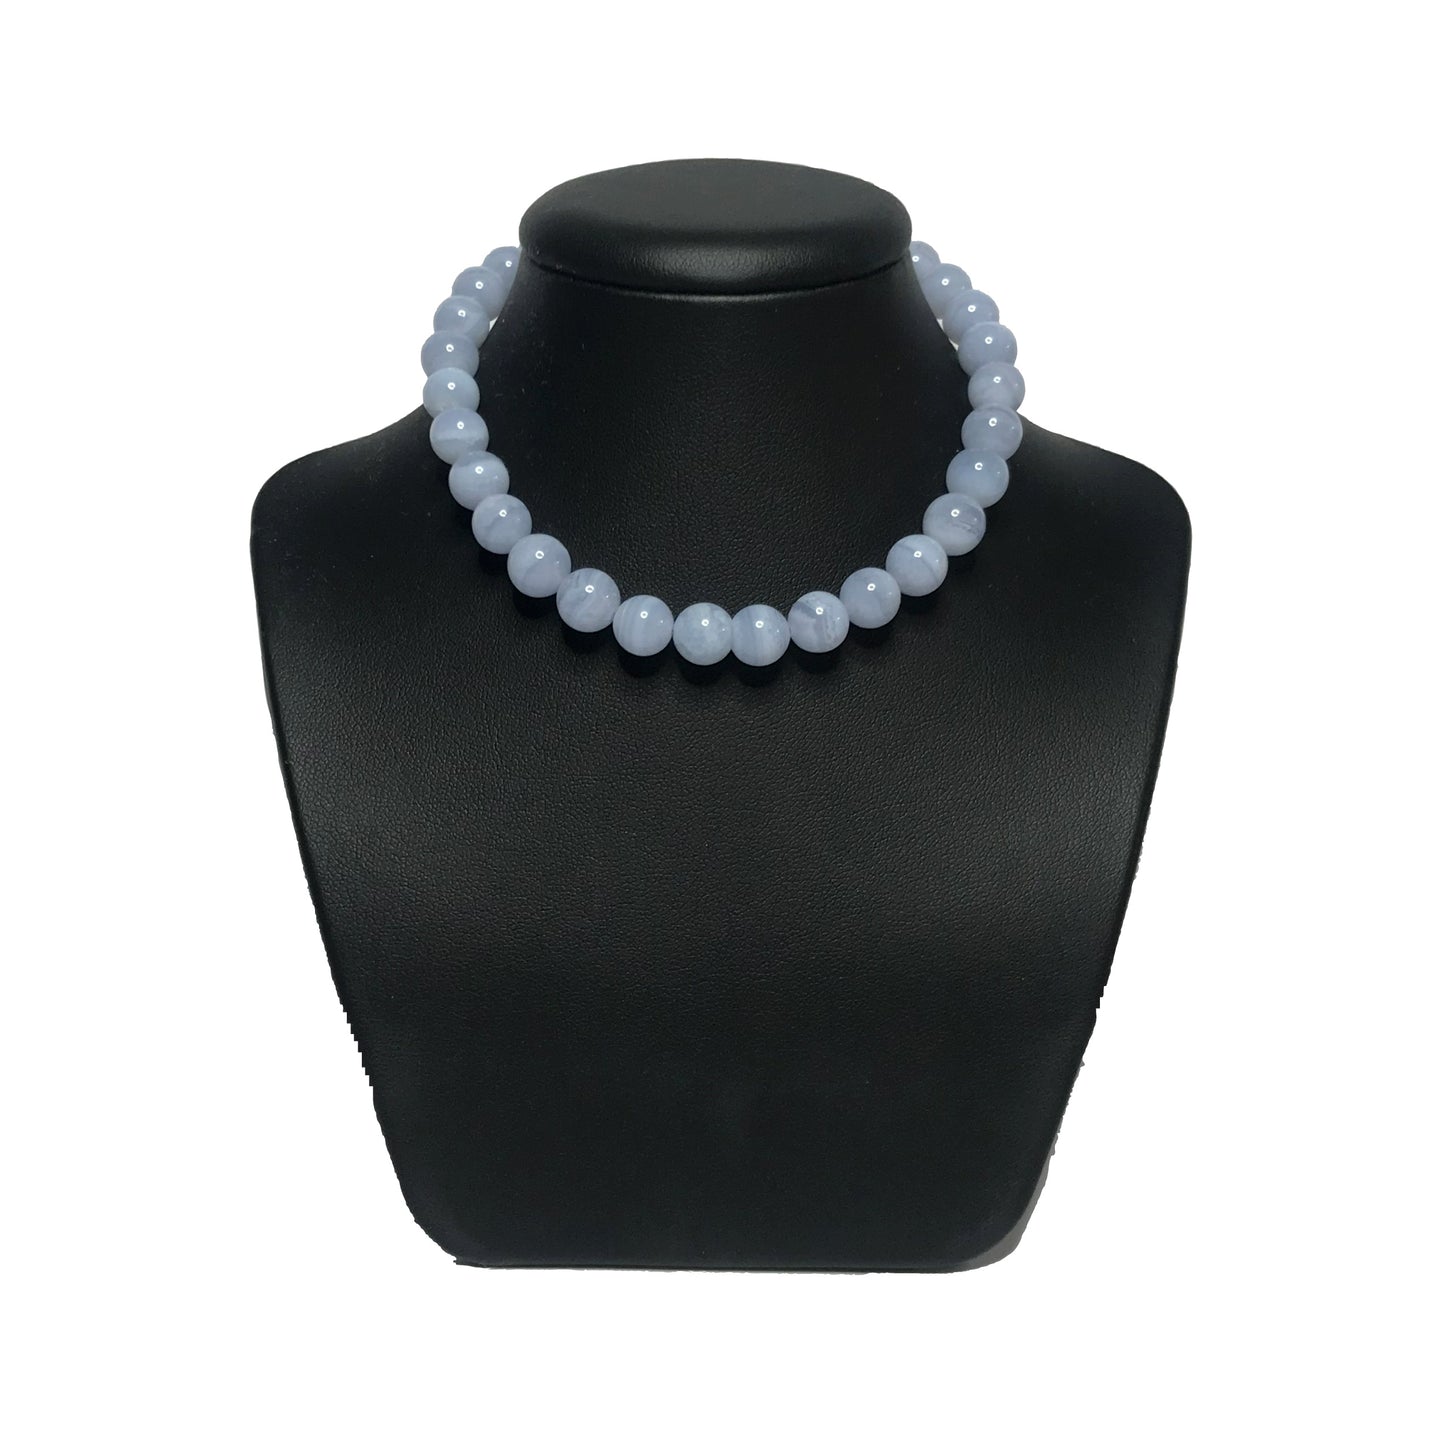 Blue lace agate beaded necklace on stand